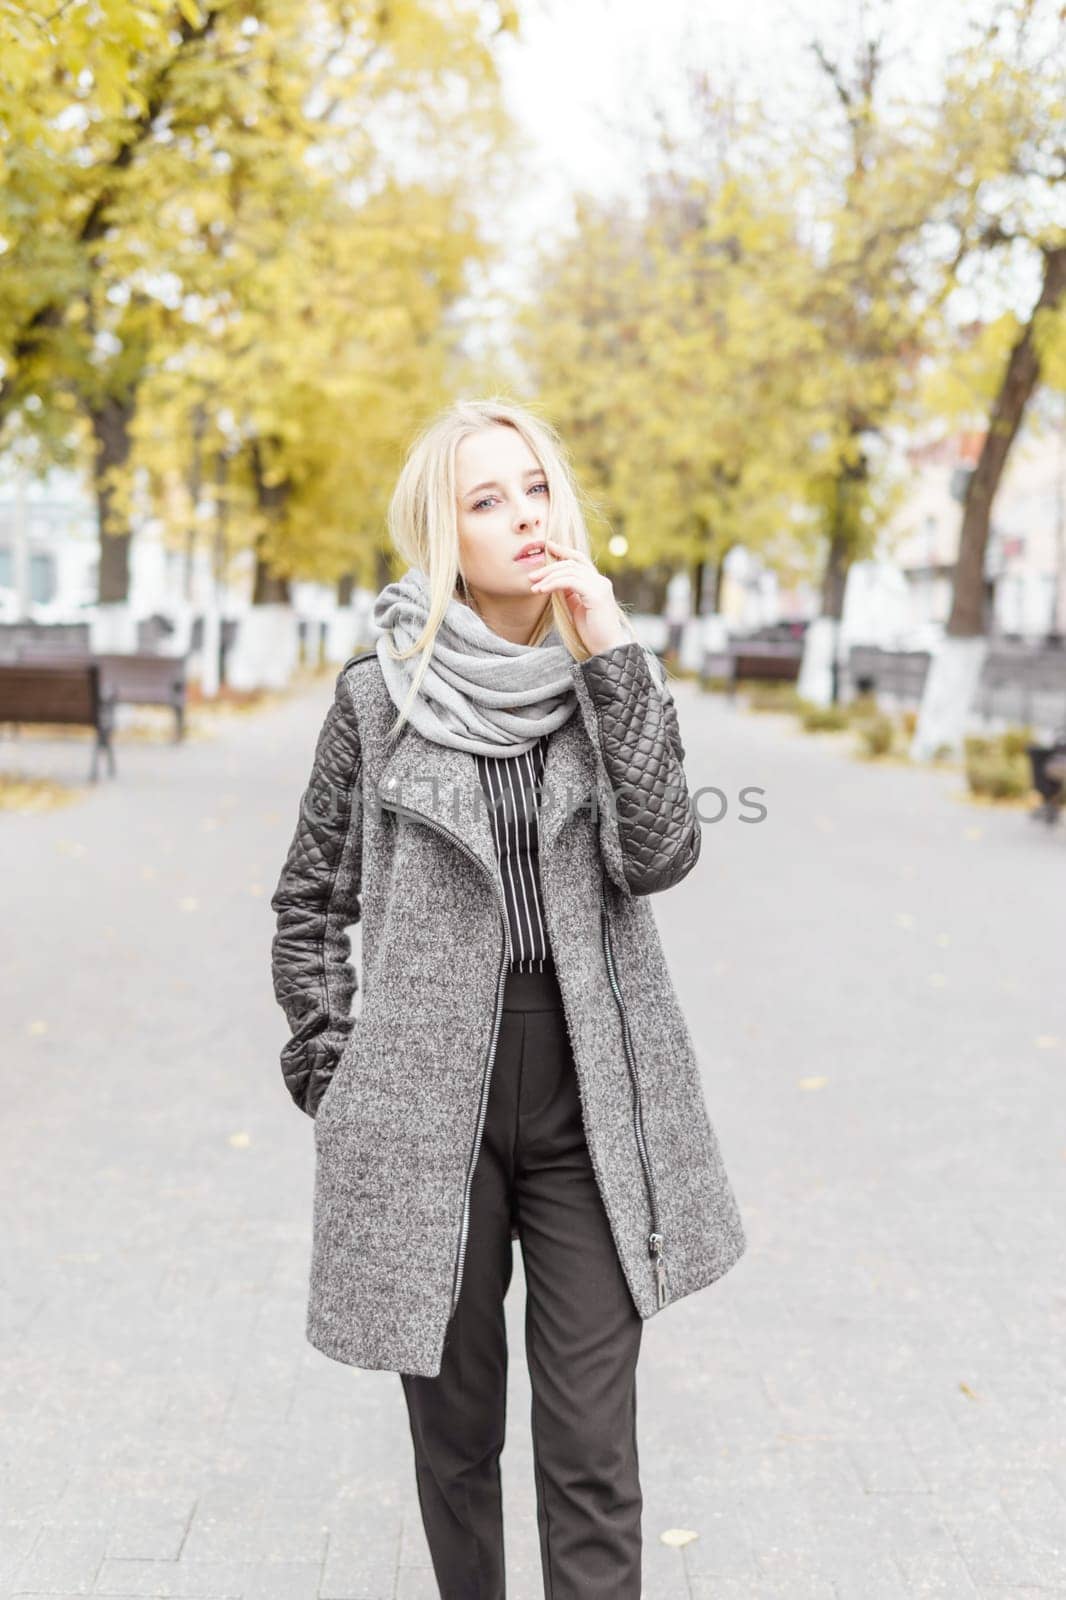 A young blonde walks through the autumn city in a gray coat. The concept of urban style and lifestyle. by Annu1tochka